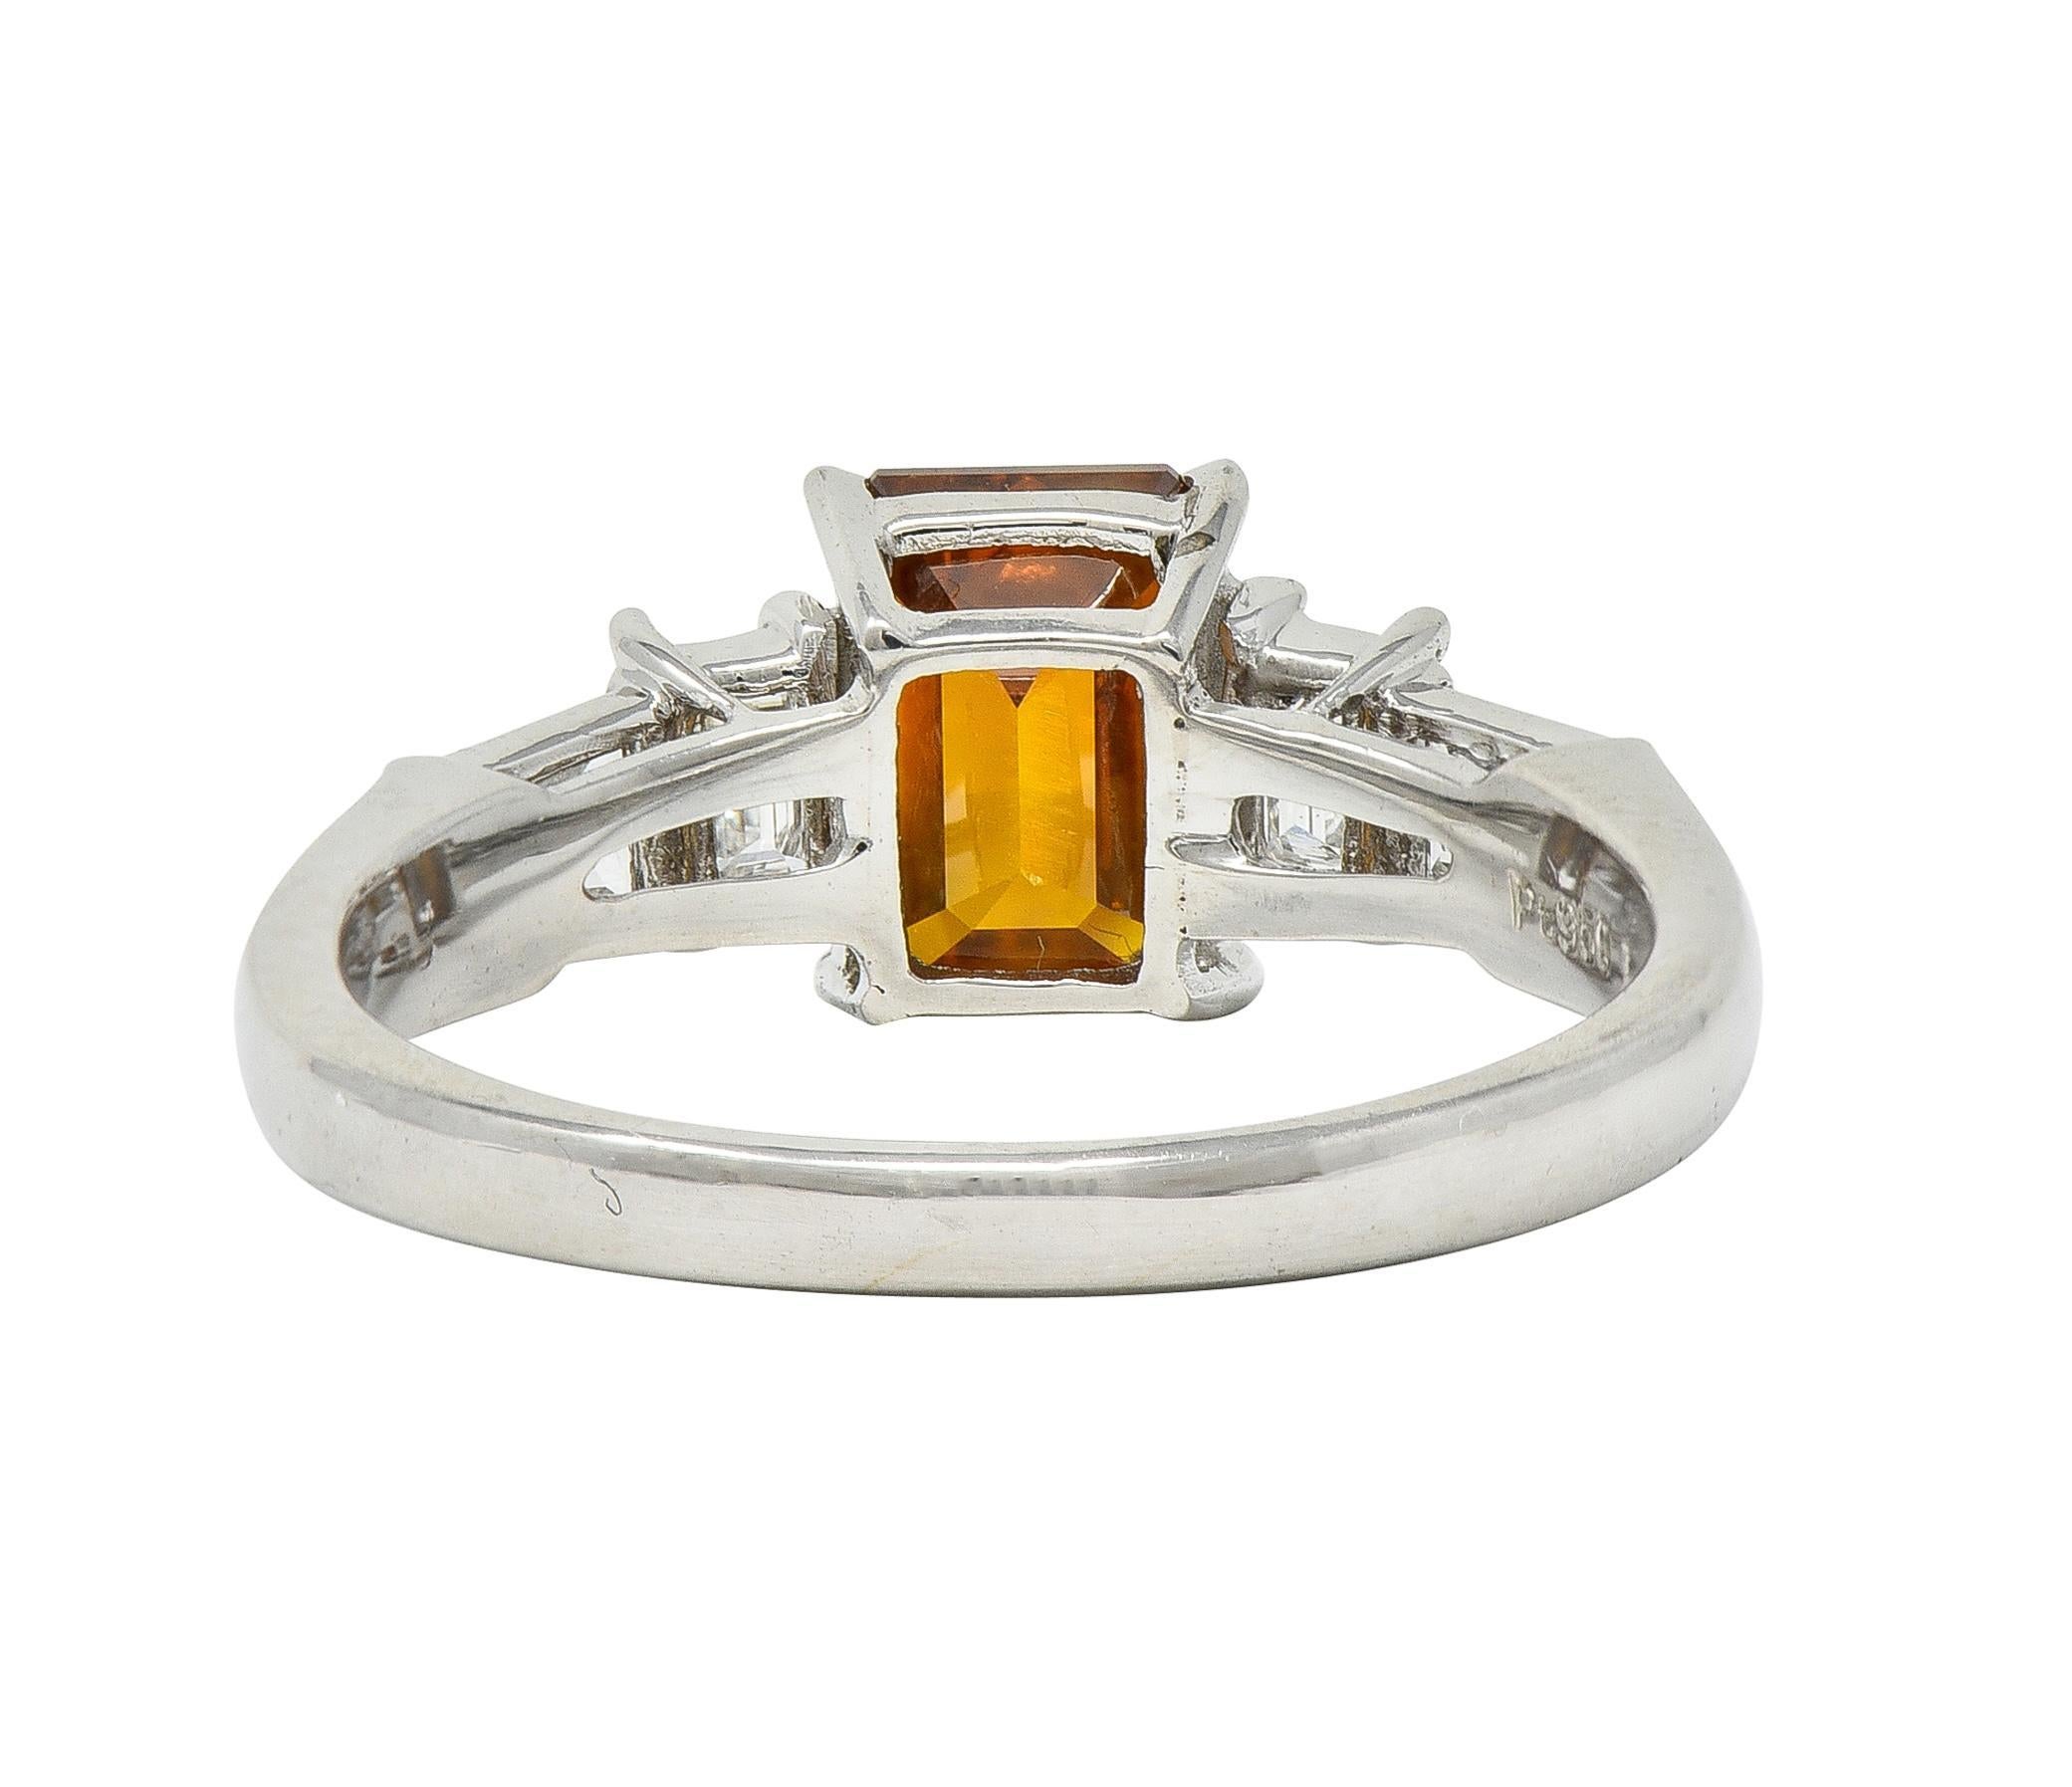 Contemporary Fancy Orange Brown Diamond Platinum Five Stone Engagement Ring In Excellent Condition For Sale In Philadelphia, PA